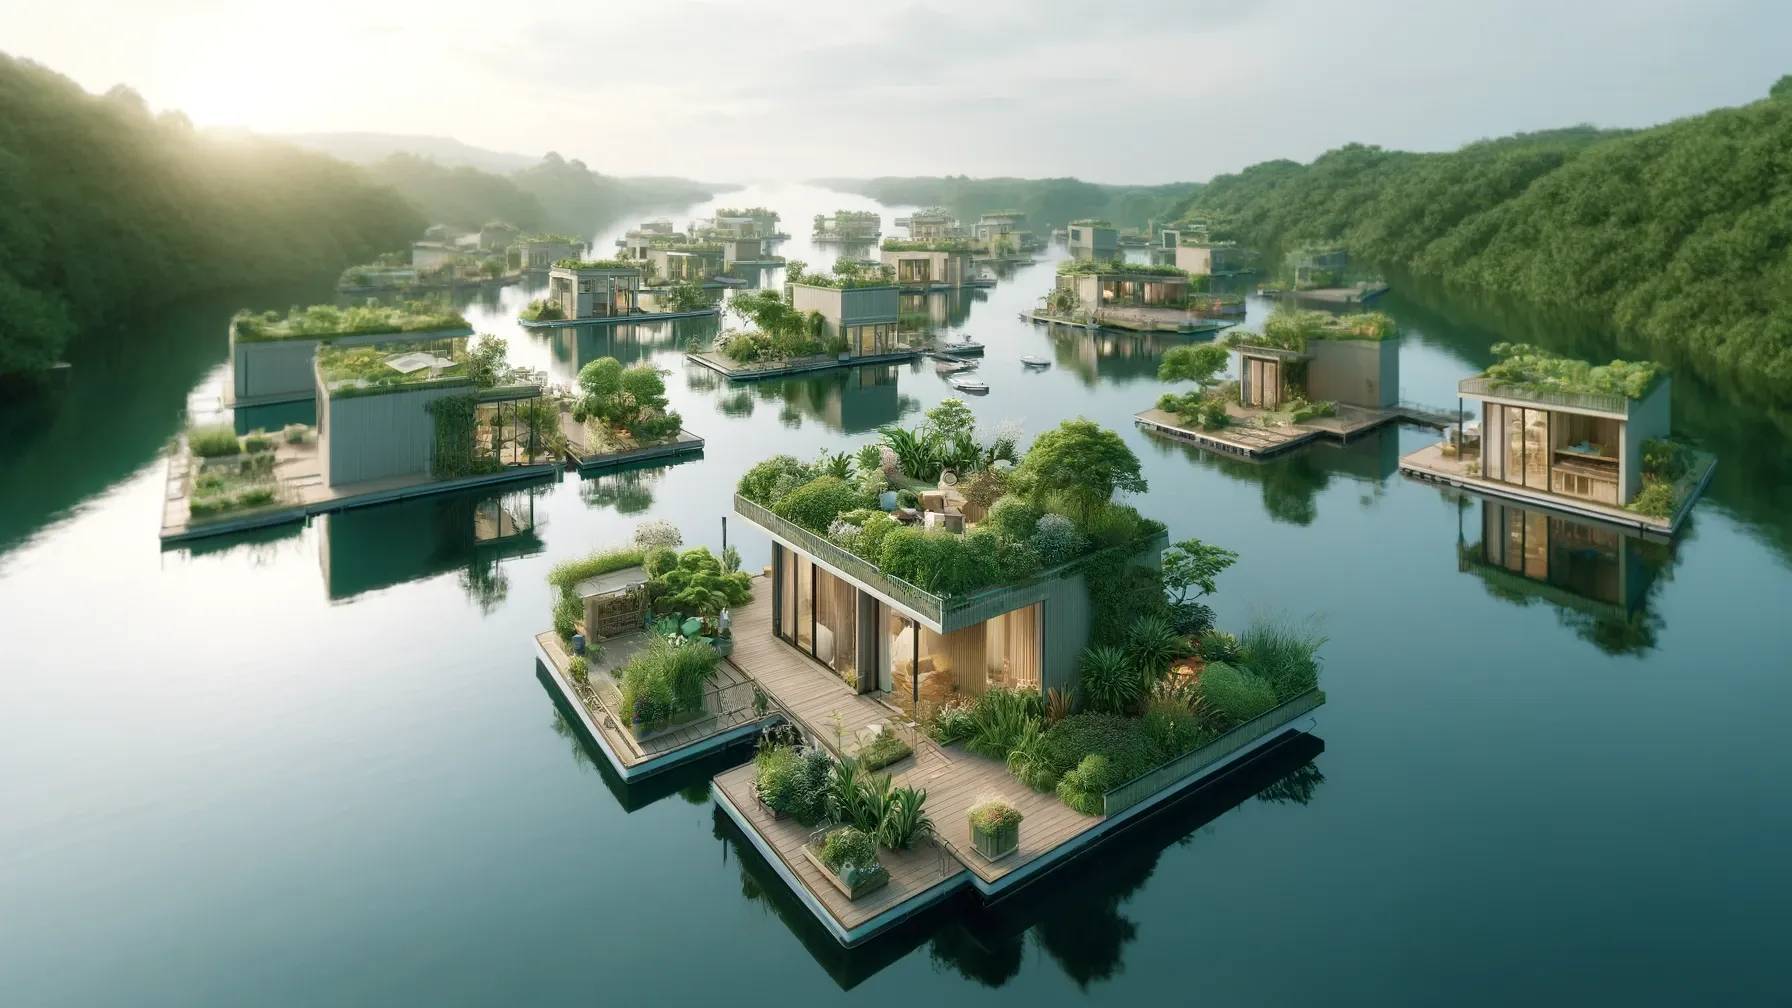  Biophilic design - Floating residential habitats on a tranquil bay